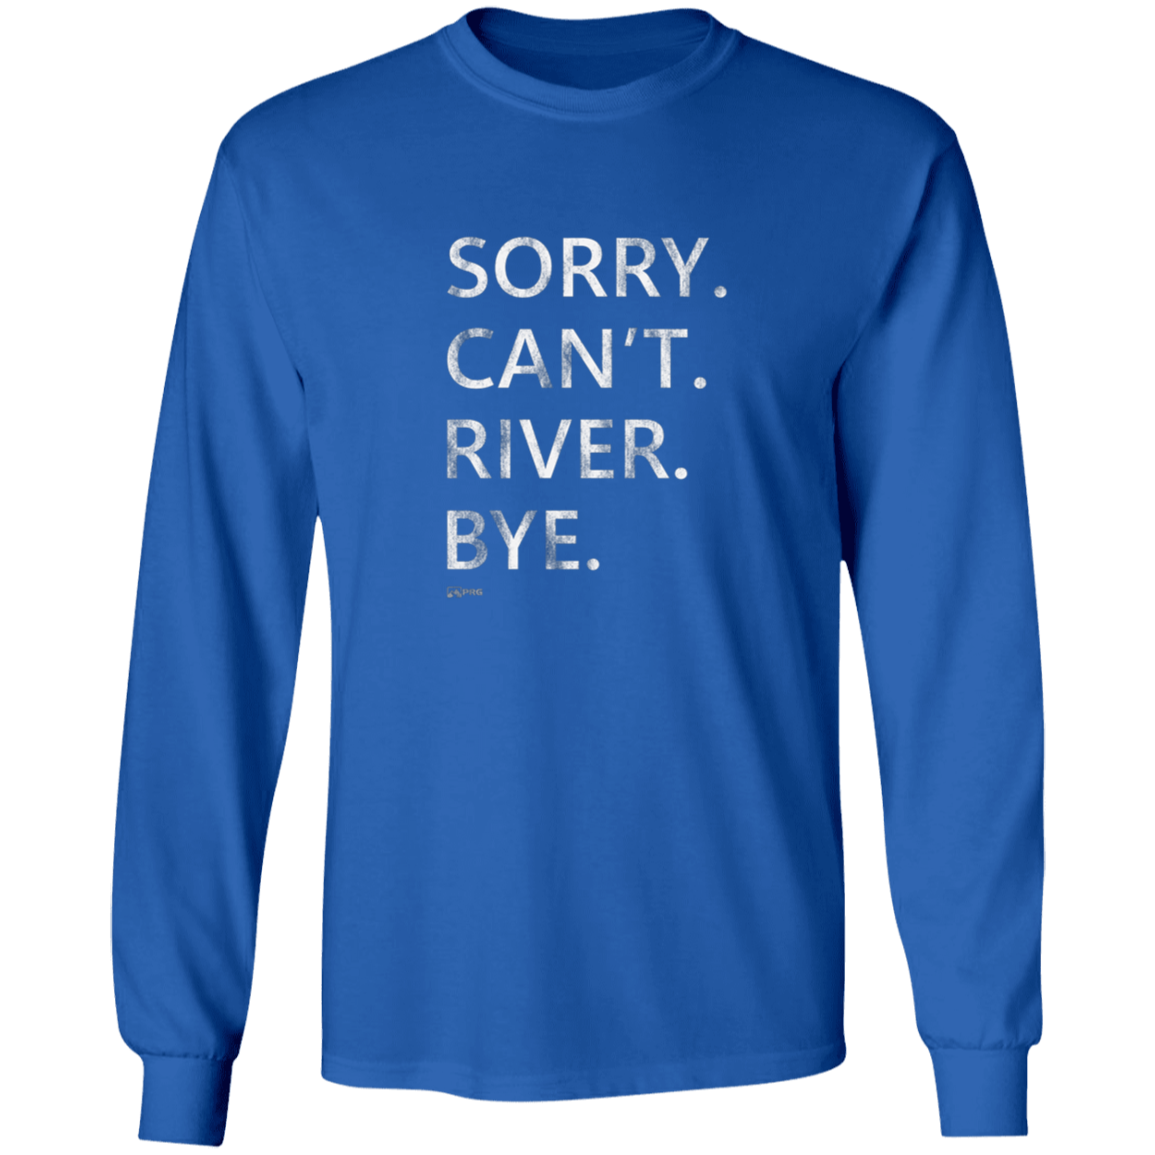 Sorry. Can't. River. Bye. - Long Sleeve